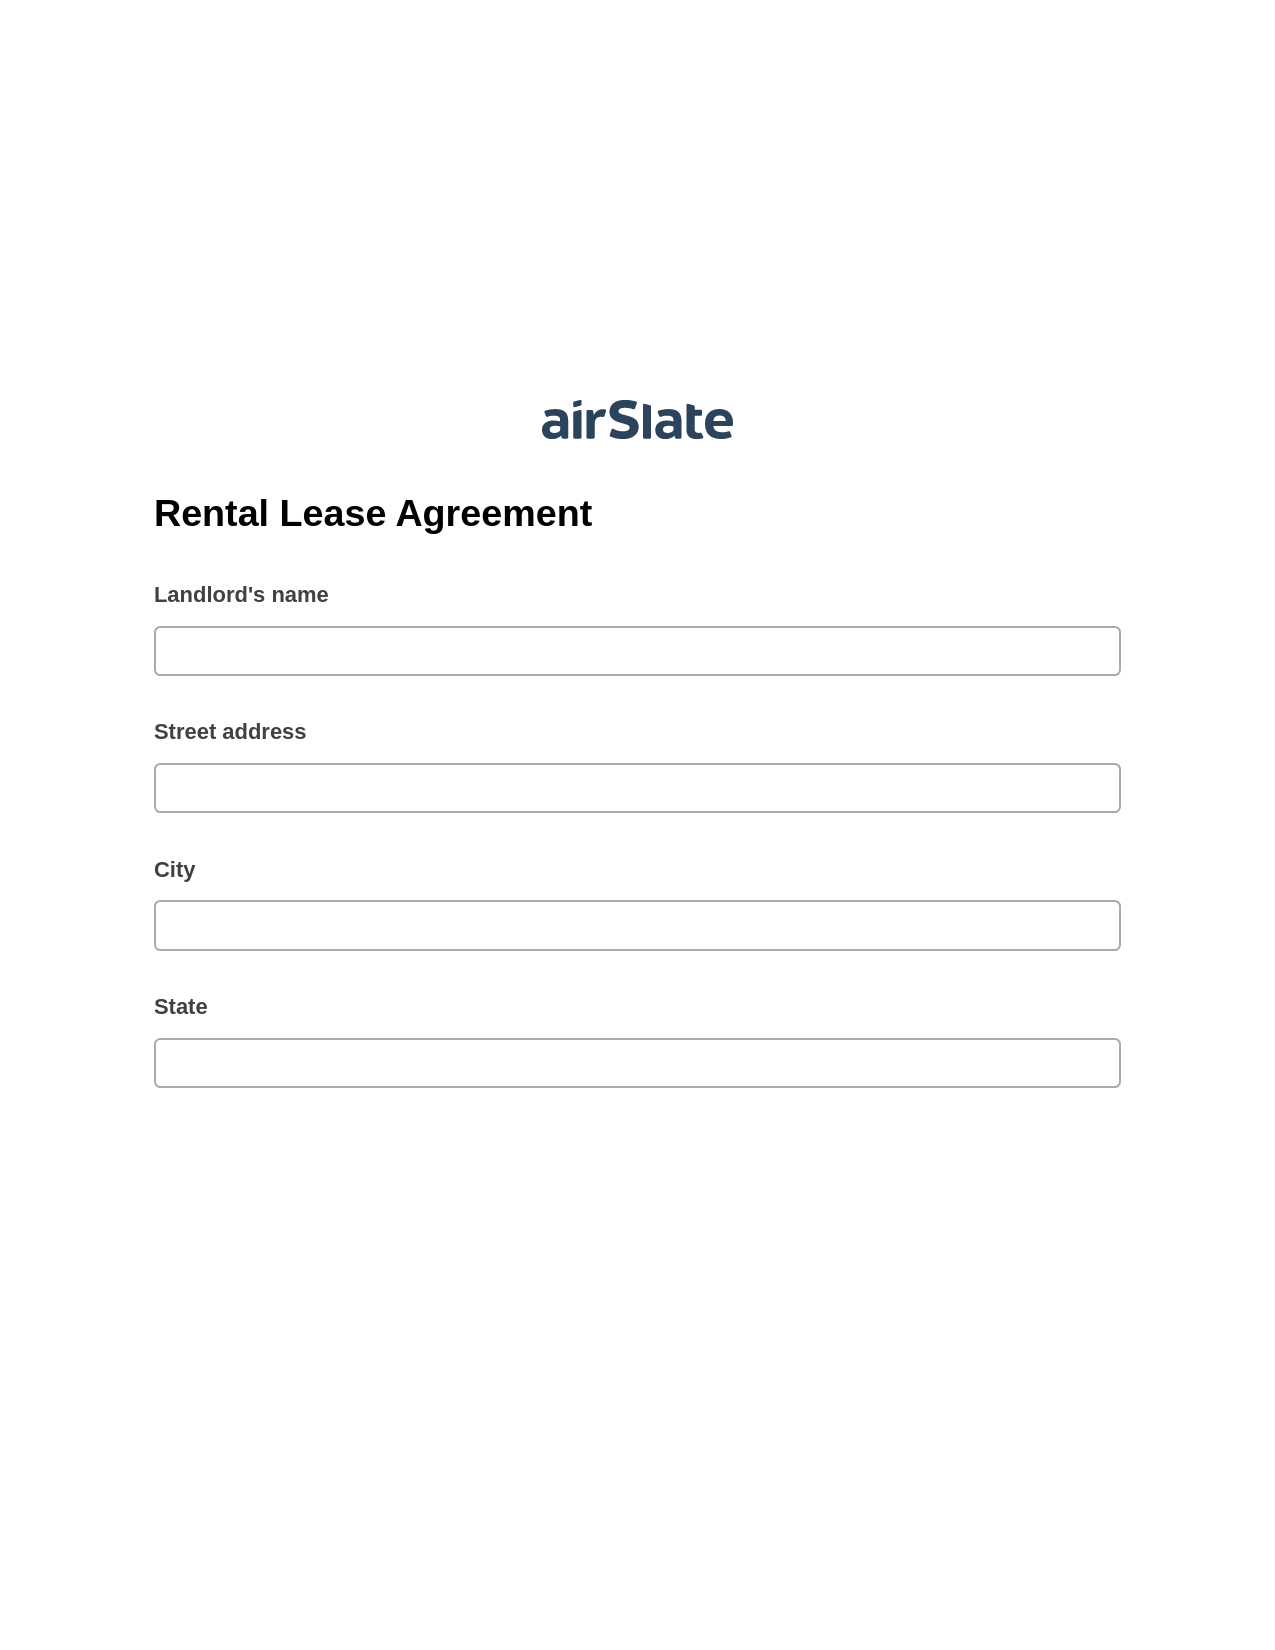 Rental Lease Agreement Pre-fill from MySQL Dropdown Options Bot, Audit Trail Bot, Export to Excel 365 Bot